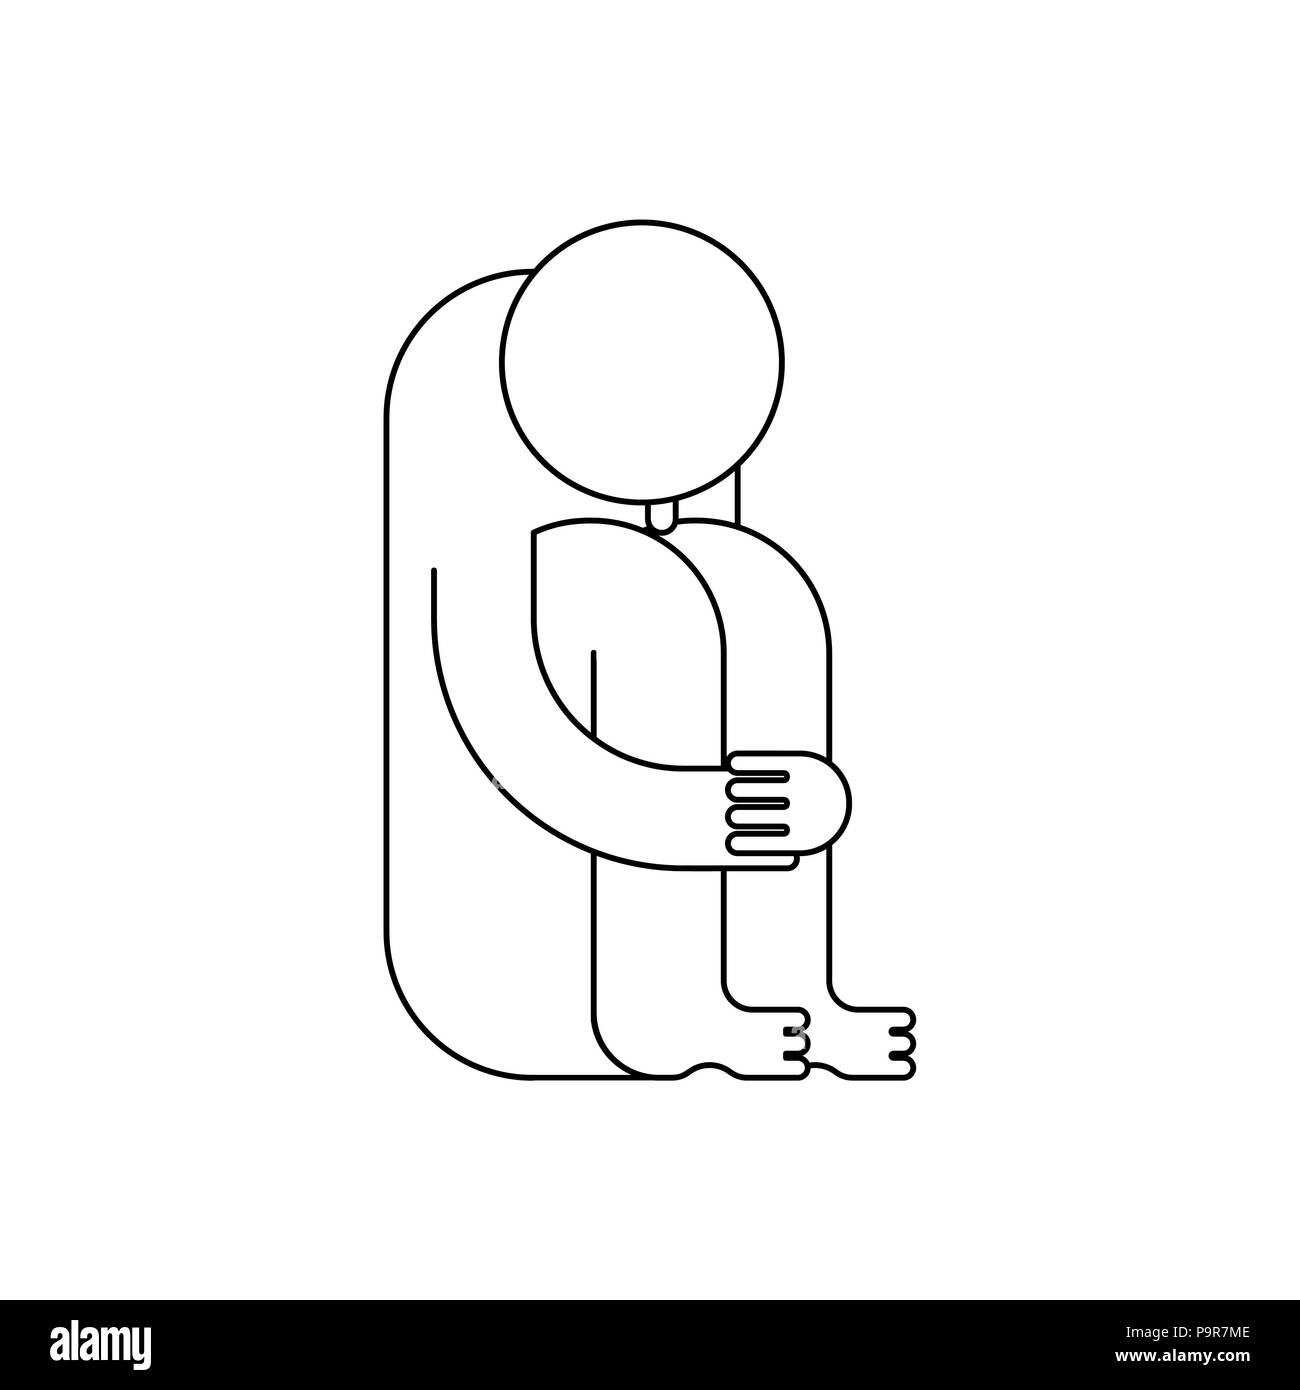 Whiner icon. Whiny sign. Sad Man Crying. Moaner symbol. downer sigh-face Vector illustration Stock Vector